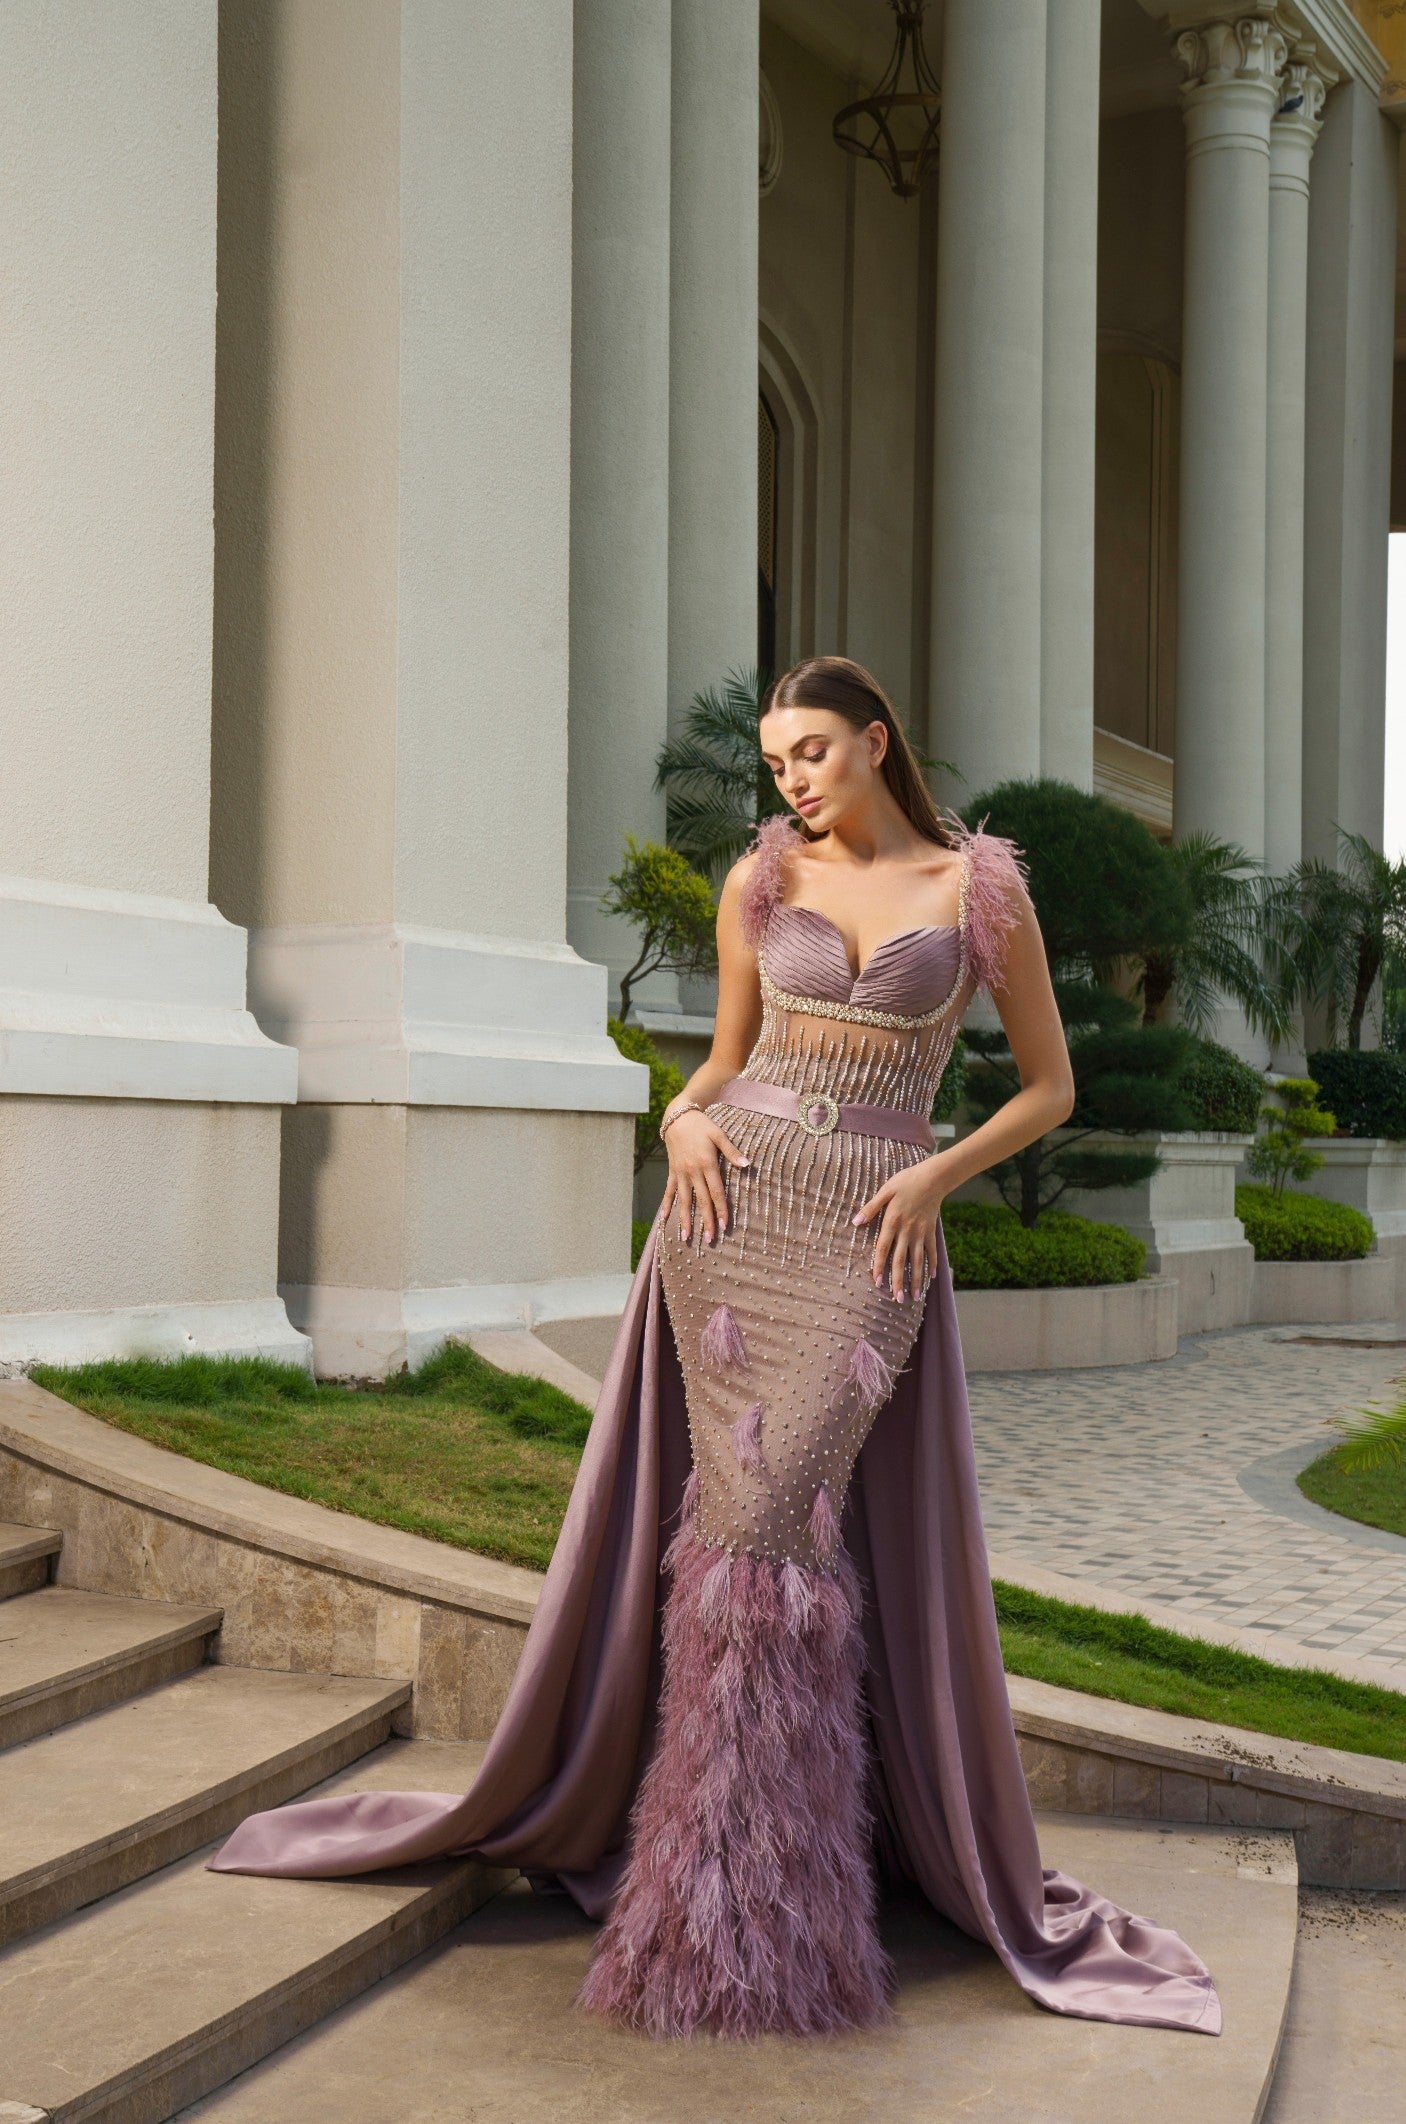 Olive color Trendy Organza Gown – 𝐋𝐎𝐎𝐊𝐒 𝐀𝐍𝐃 𝐋𝐈𝐊𝐄𝐒